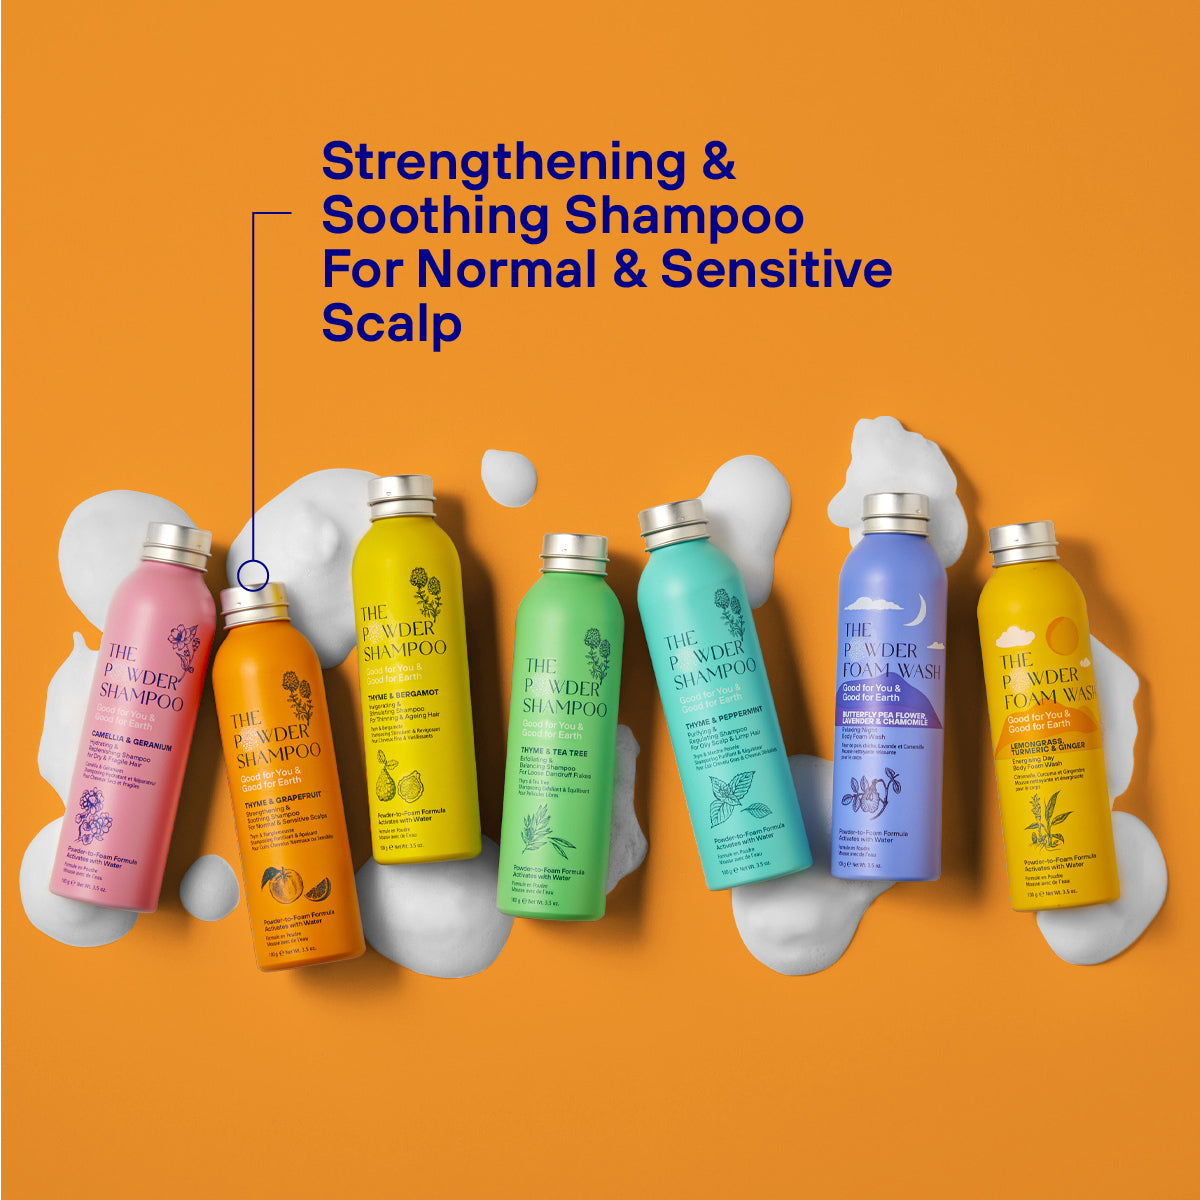 Strengthening & Soothing Powder Shampoo For Normal & Sensitive Scalps